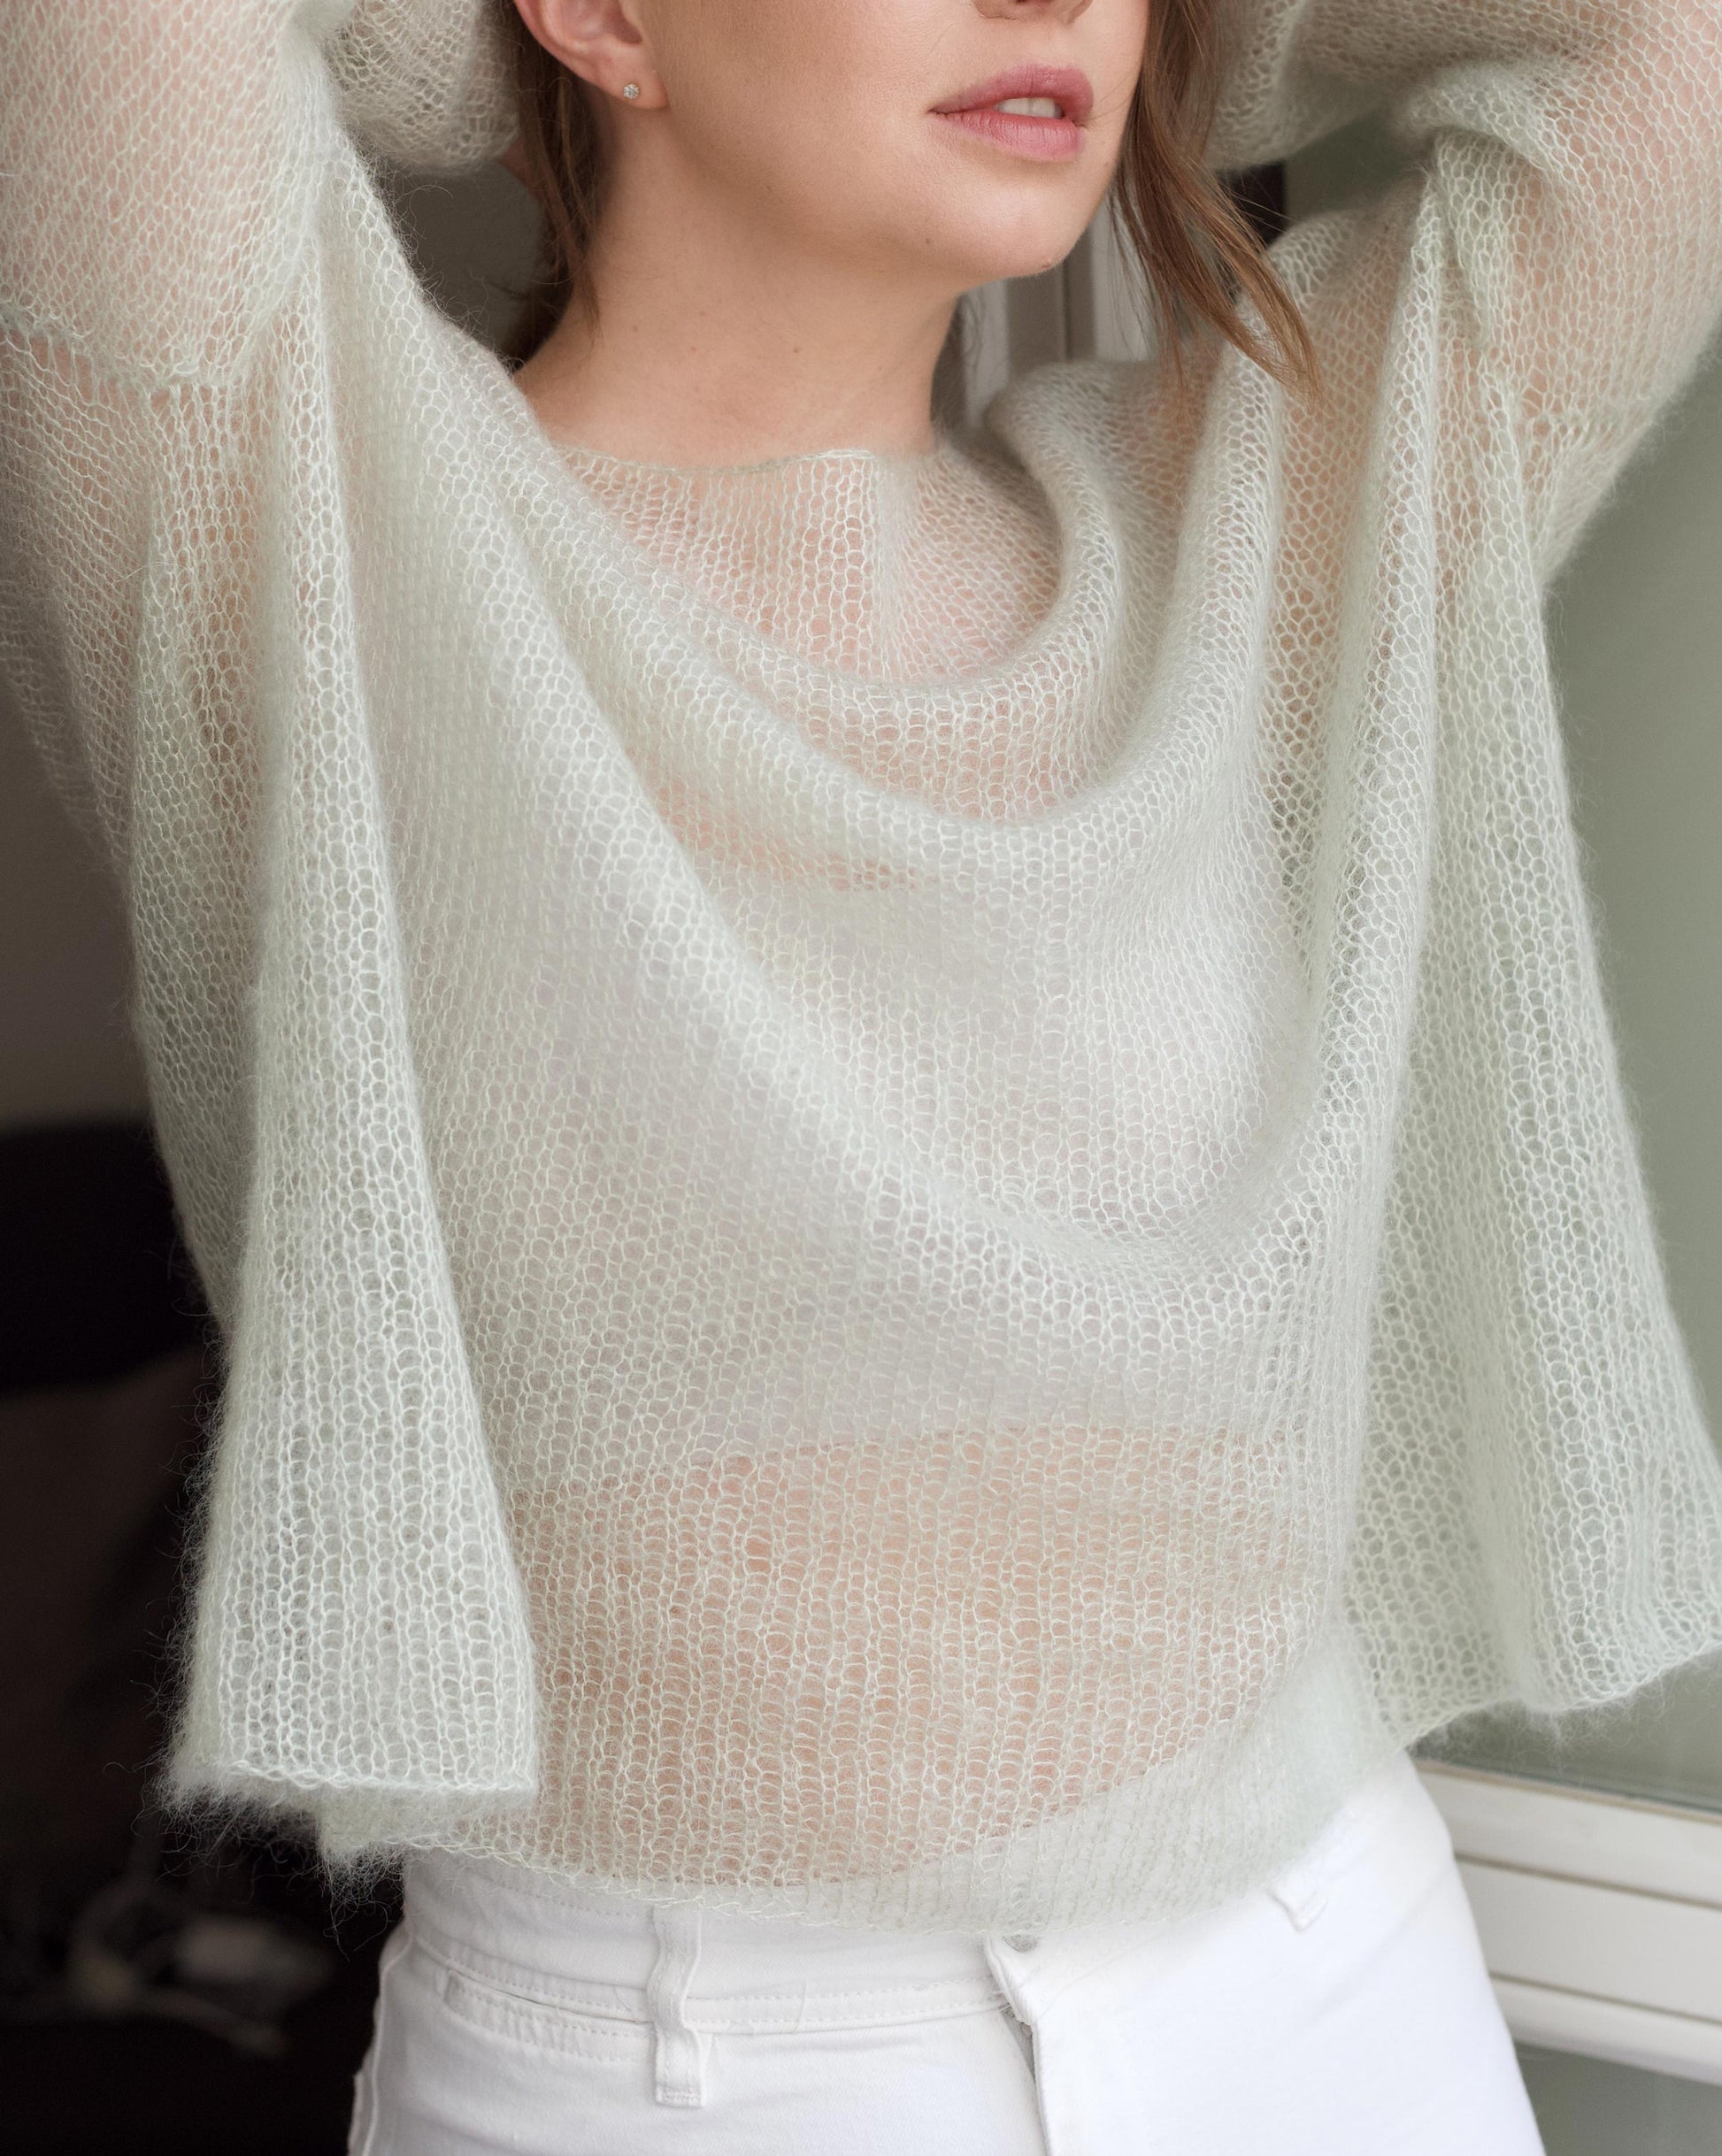 Thin Jumper by MorecaKnit, a lightweight and sheer knitting pattern